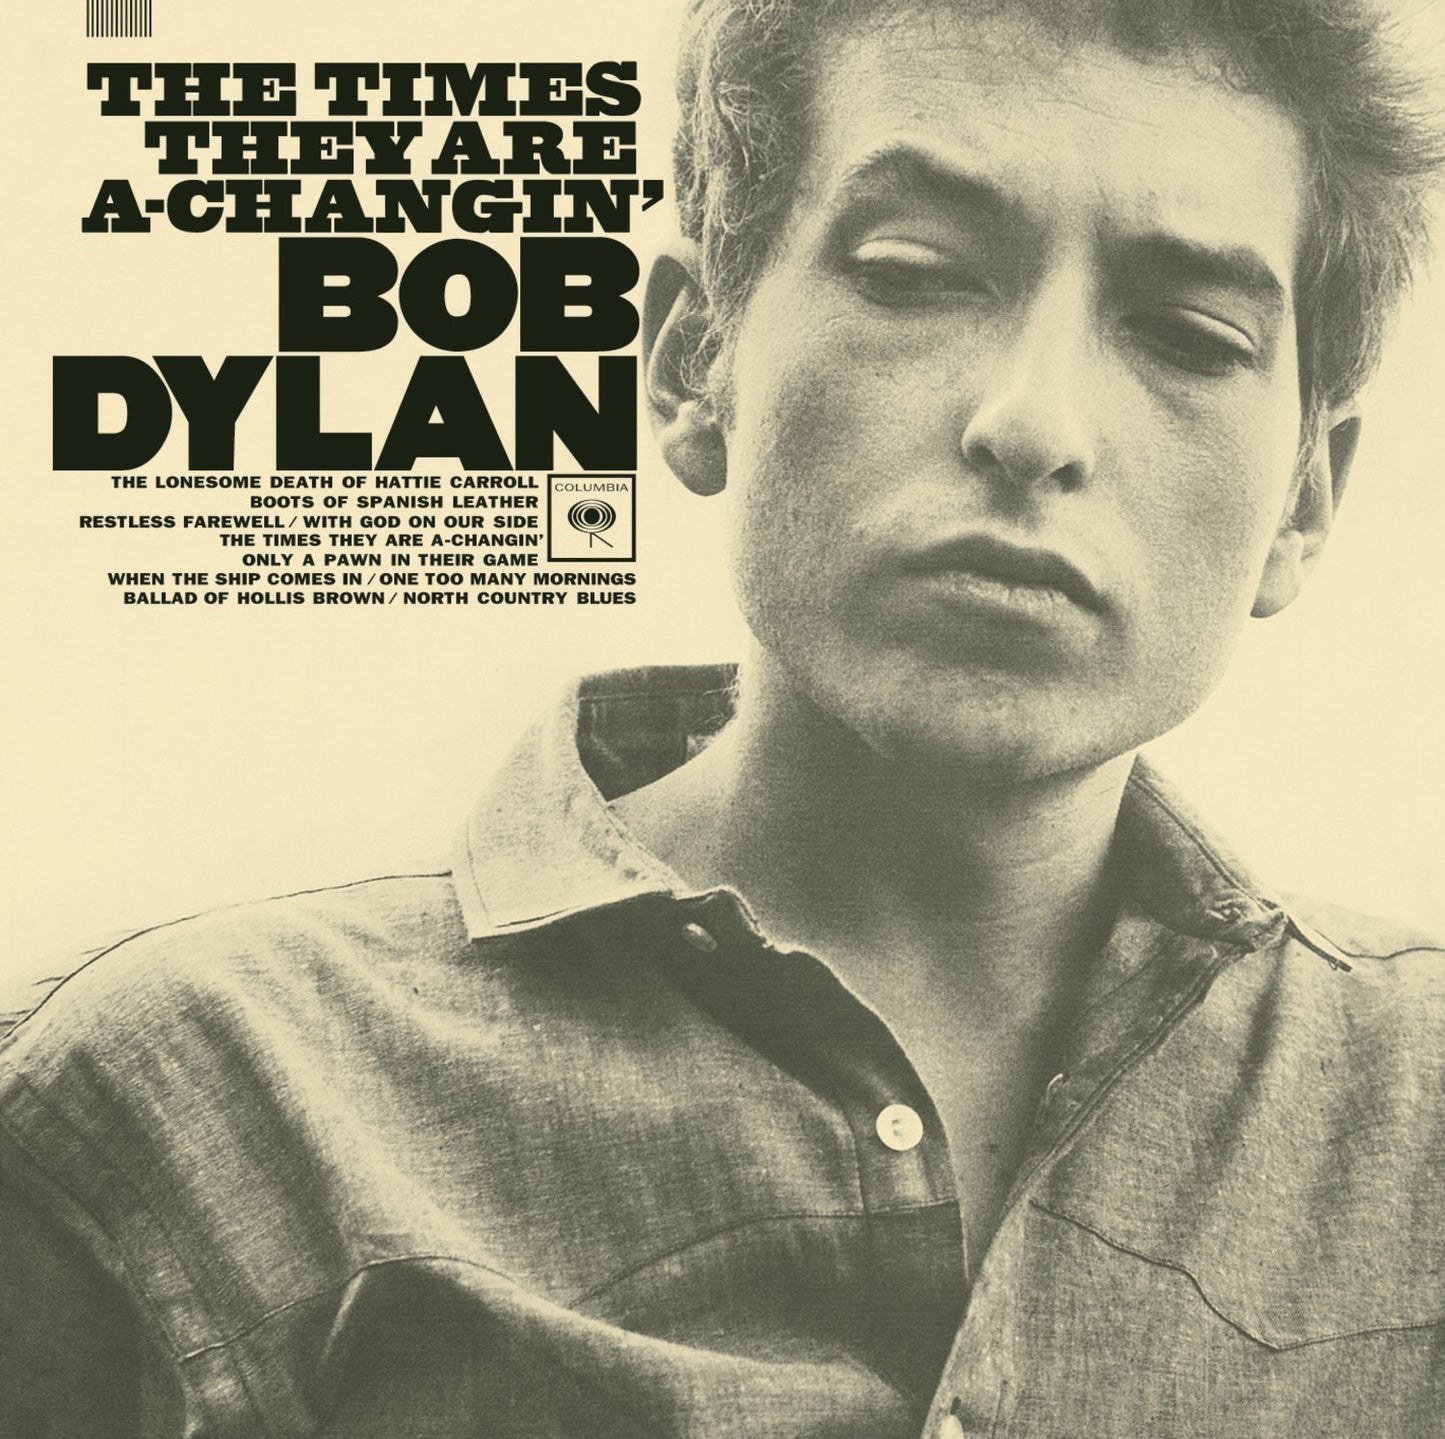 Bob Dylan - The Times They Are A-Changin' - CD